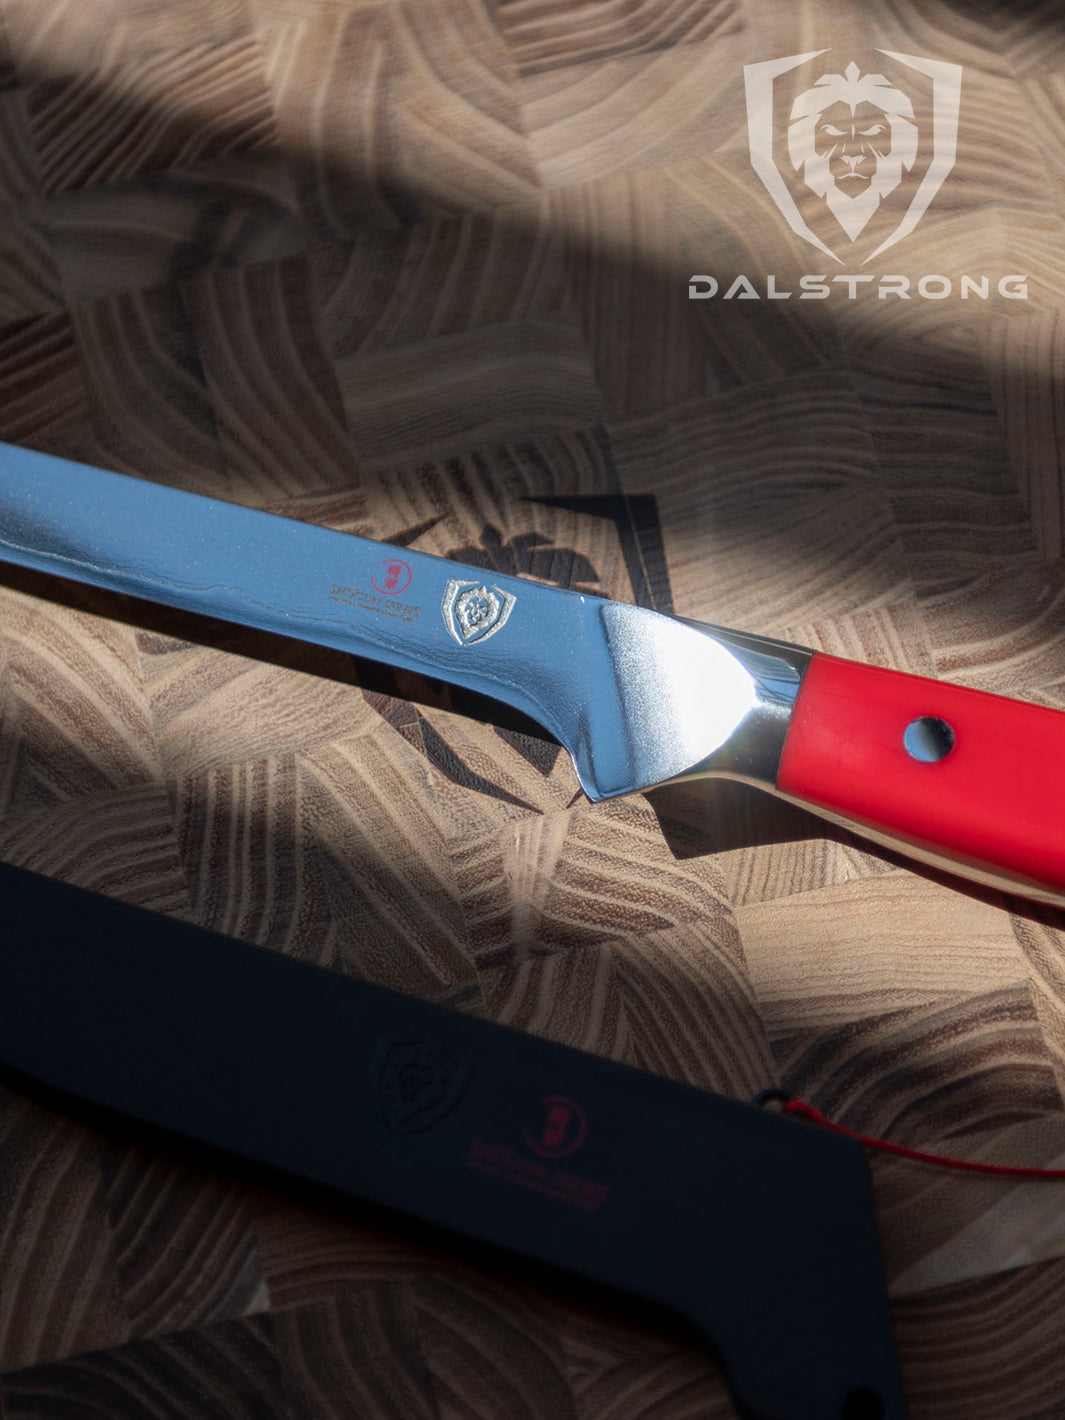 Dalstrong shogun series 6 inch boning knife with red handle and black sheath in top of a dalstrong wooden board.